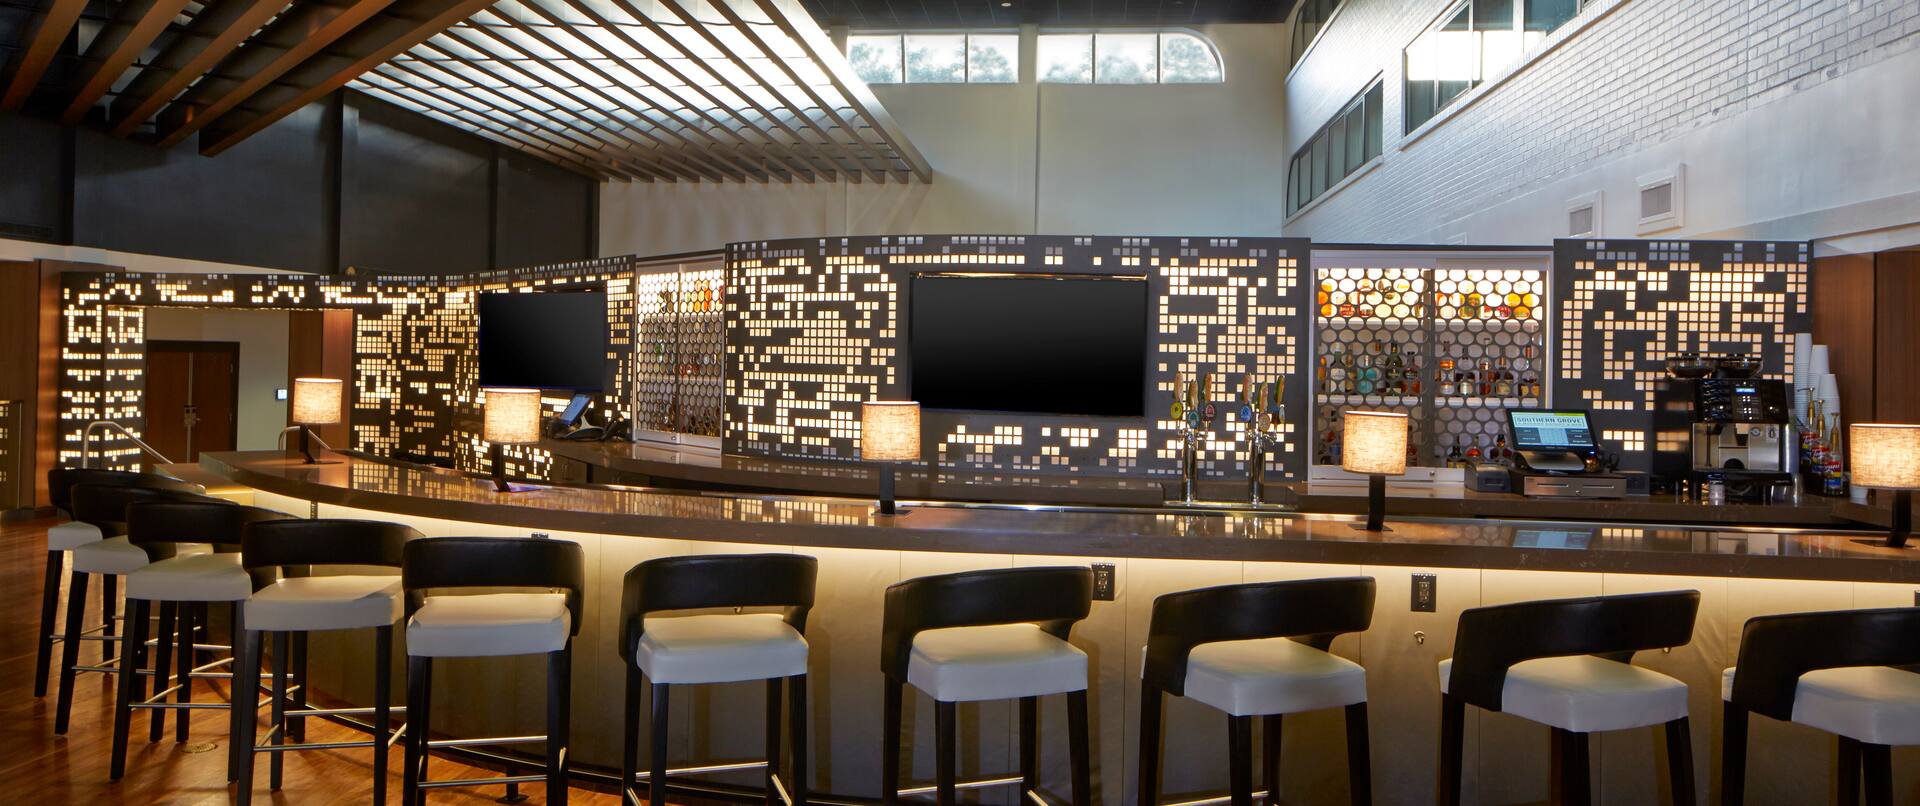 Counter Seating at Fully Stocked Bar With TVs and Illuminated Lamps